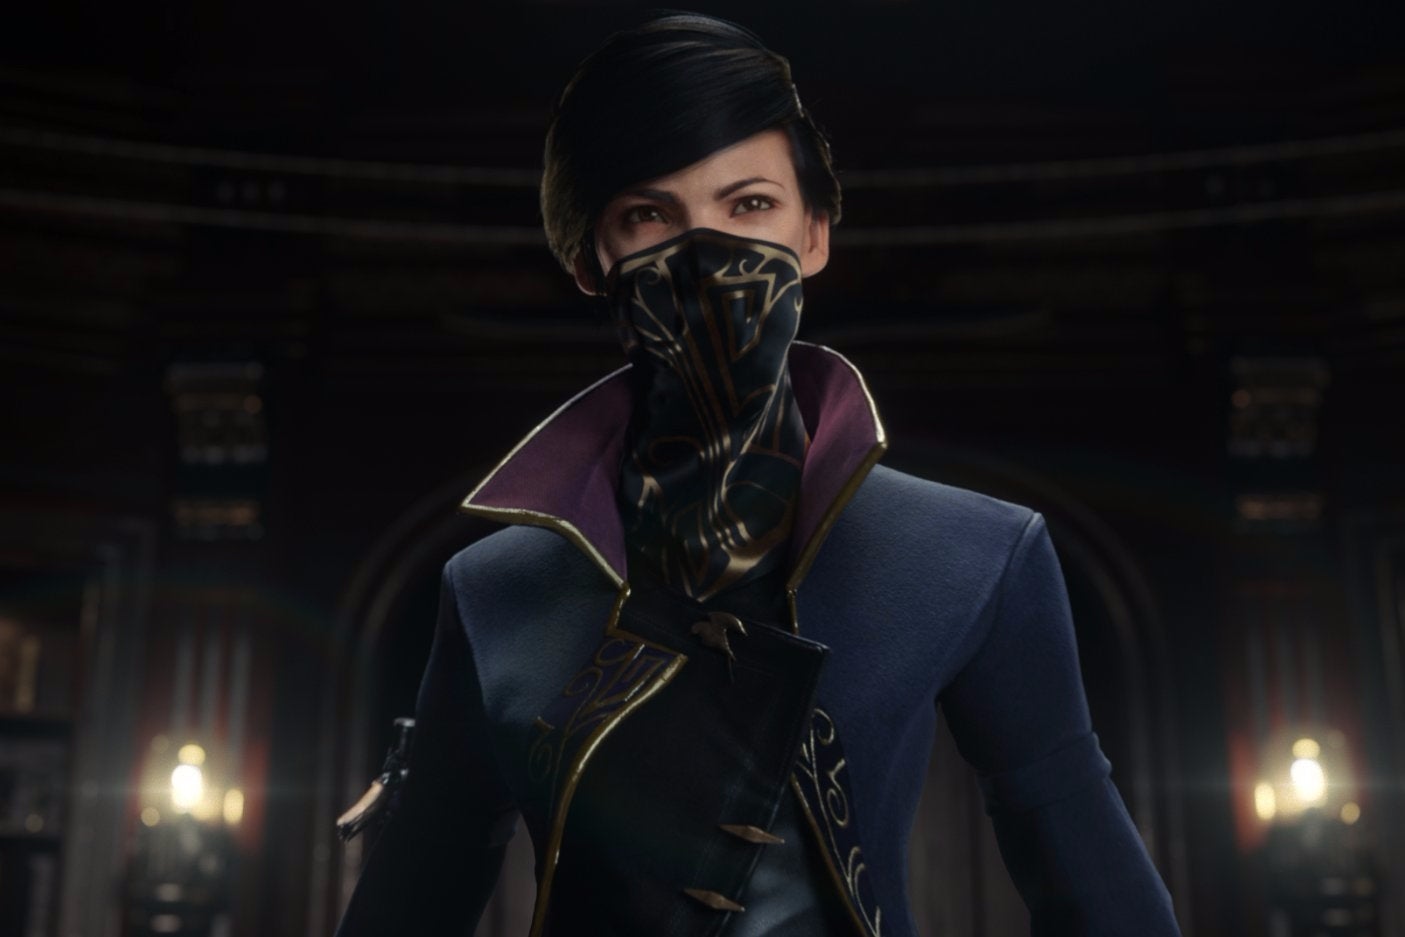 Image for Dishonored 2 lets you play as Corvo or Emily Kaldwin